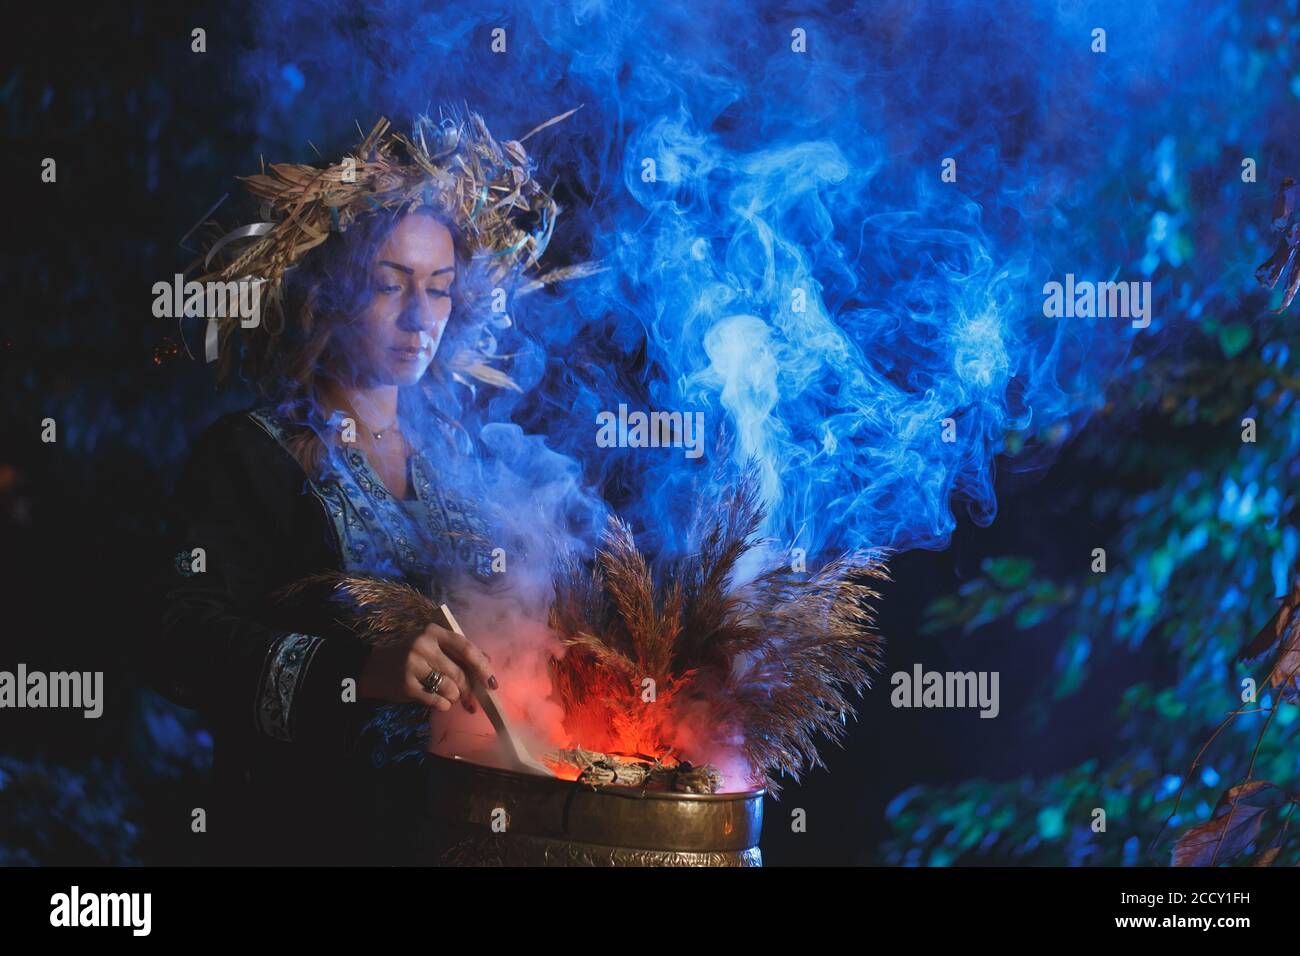 A forest witch brews a potion holding a Voodoo doll. Stock Photo